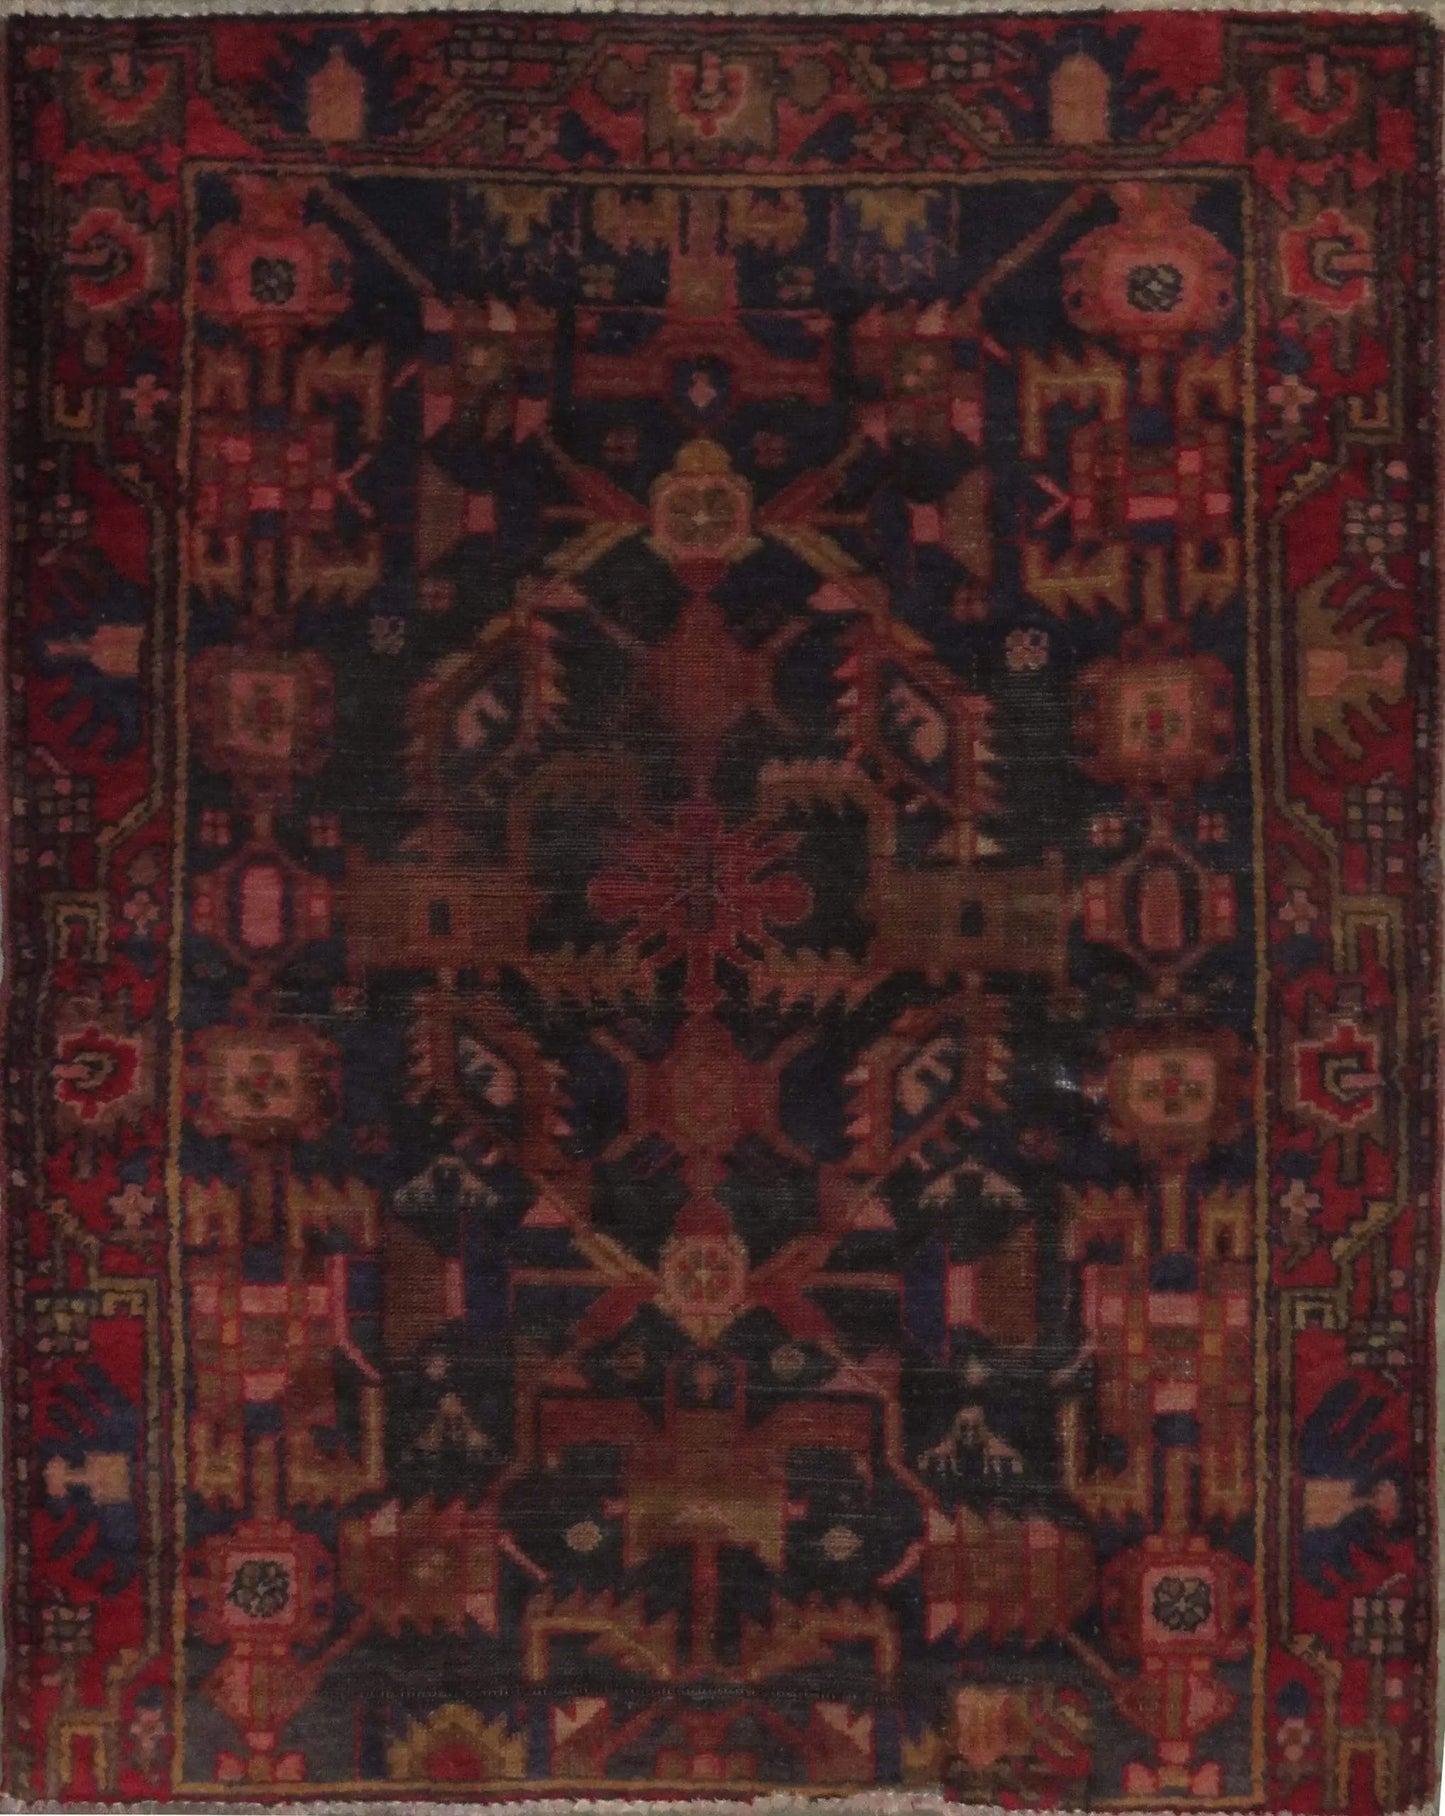 Hand-Knotted Persian Wool Rug _ Luxurious Vintage Design, 4'4" x 3'6", Artisan Crafted